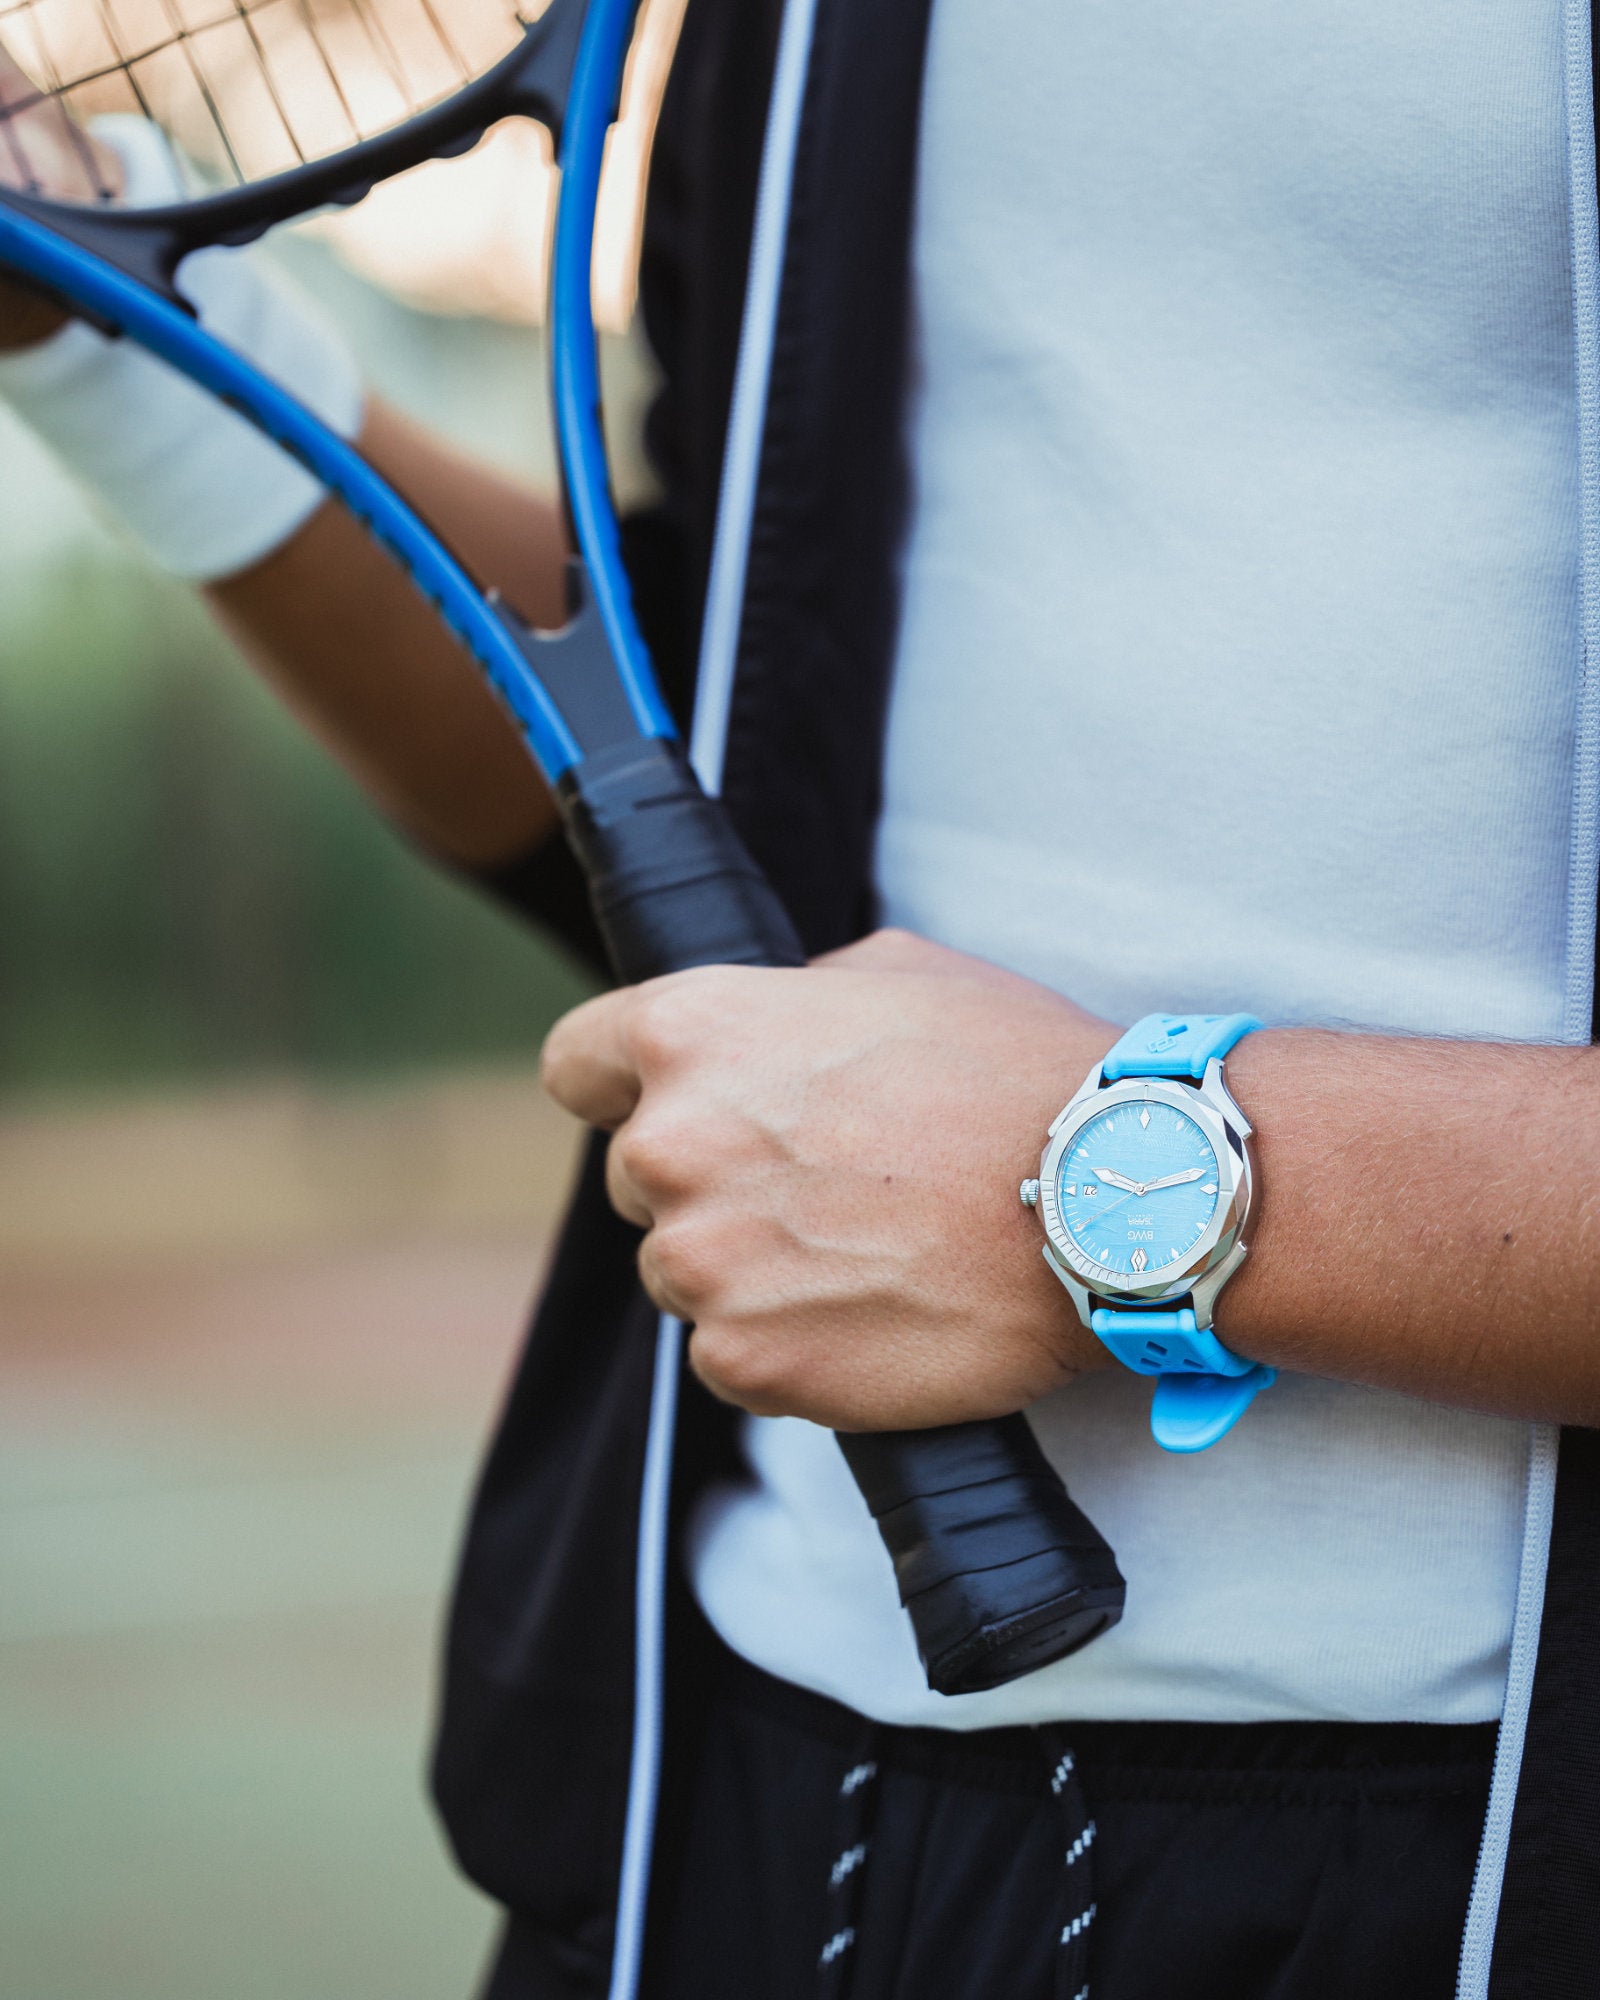 BWG ISARIA Sky Blue Automatic with Swiss L24 Landeron manufacture automatic movement watch at tennis court 